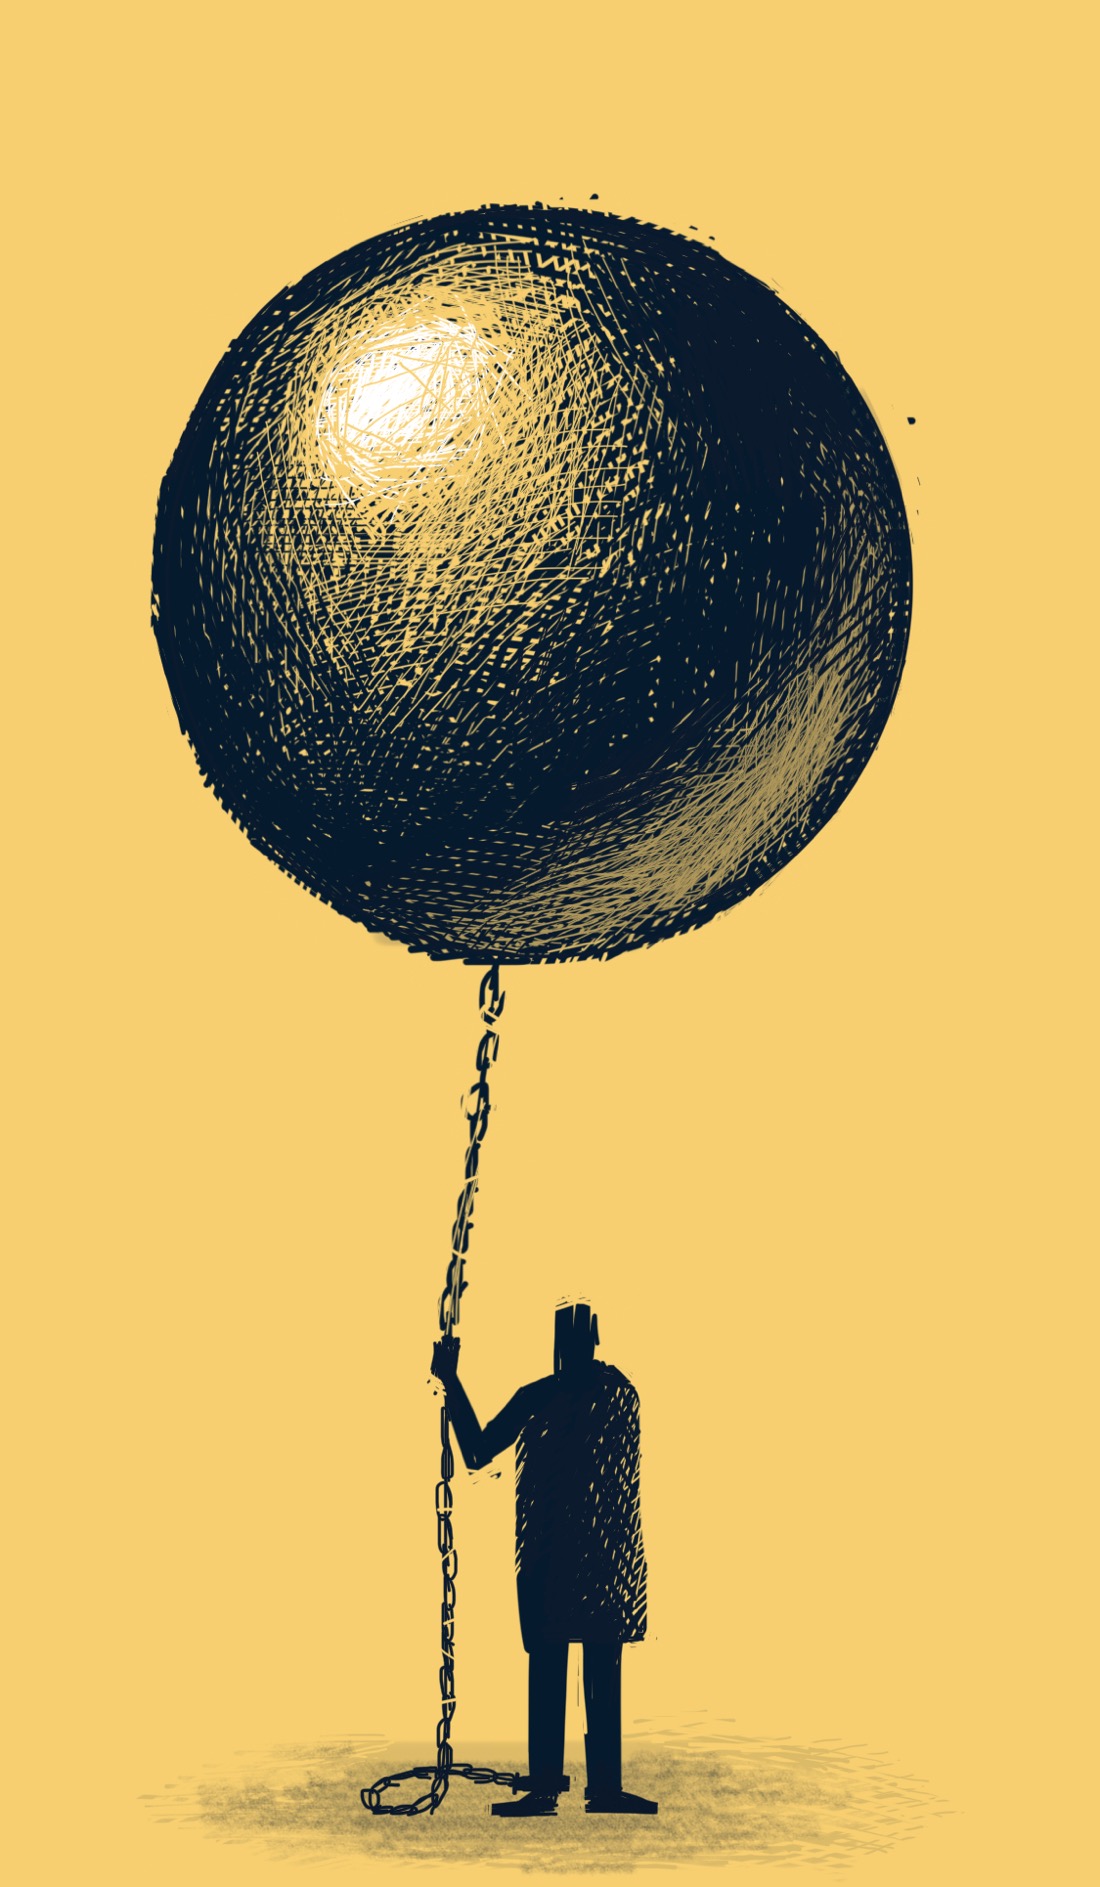 A person stands attached to a ball and chain, but the ball is enormous and hovers over the person's head like a giant balloon, the person holding it by the chain.